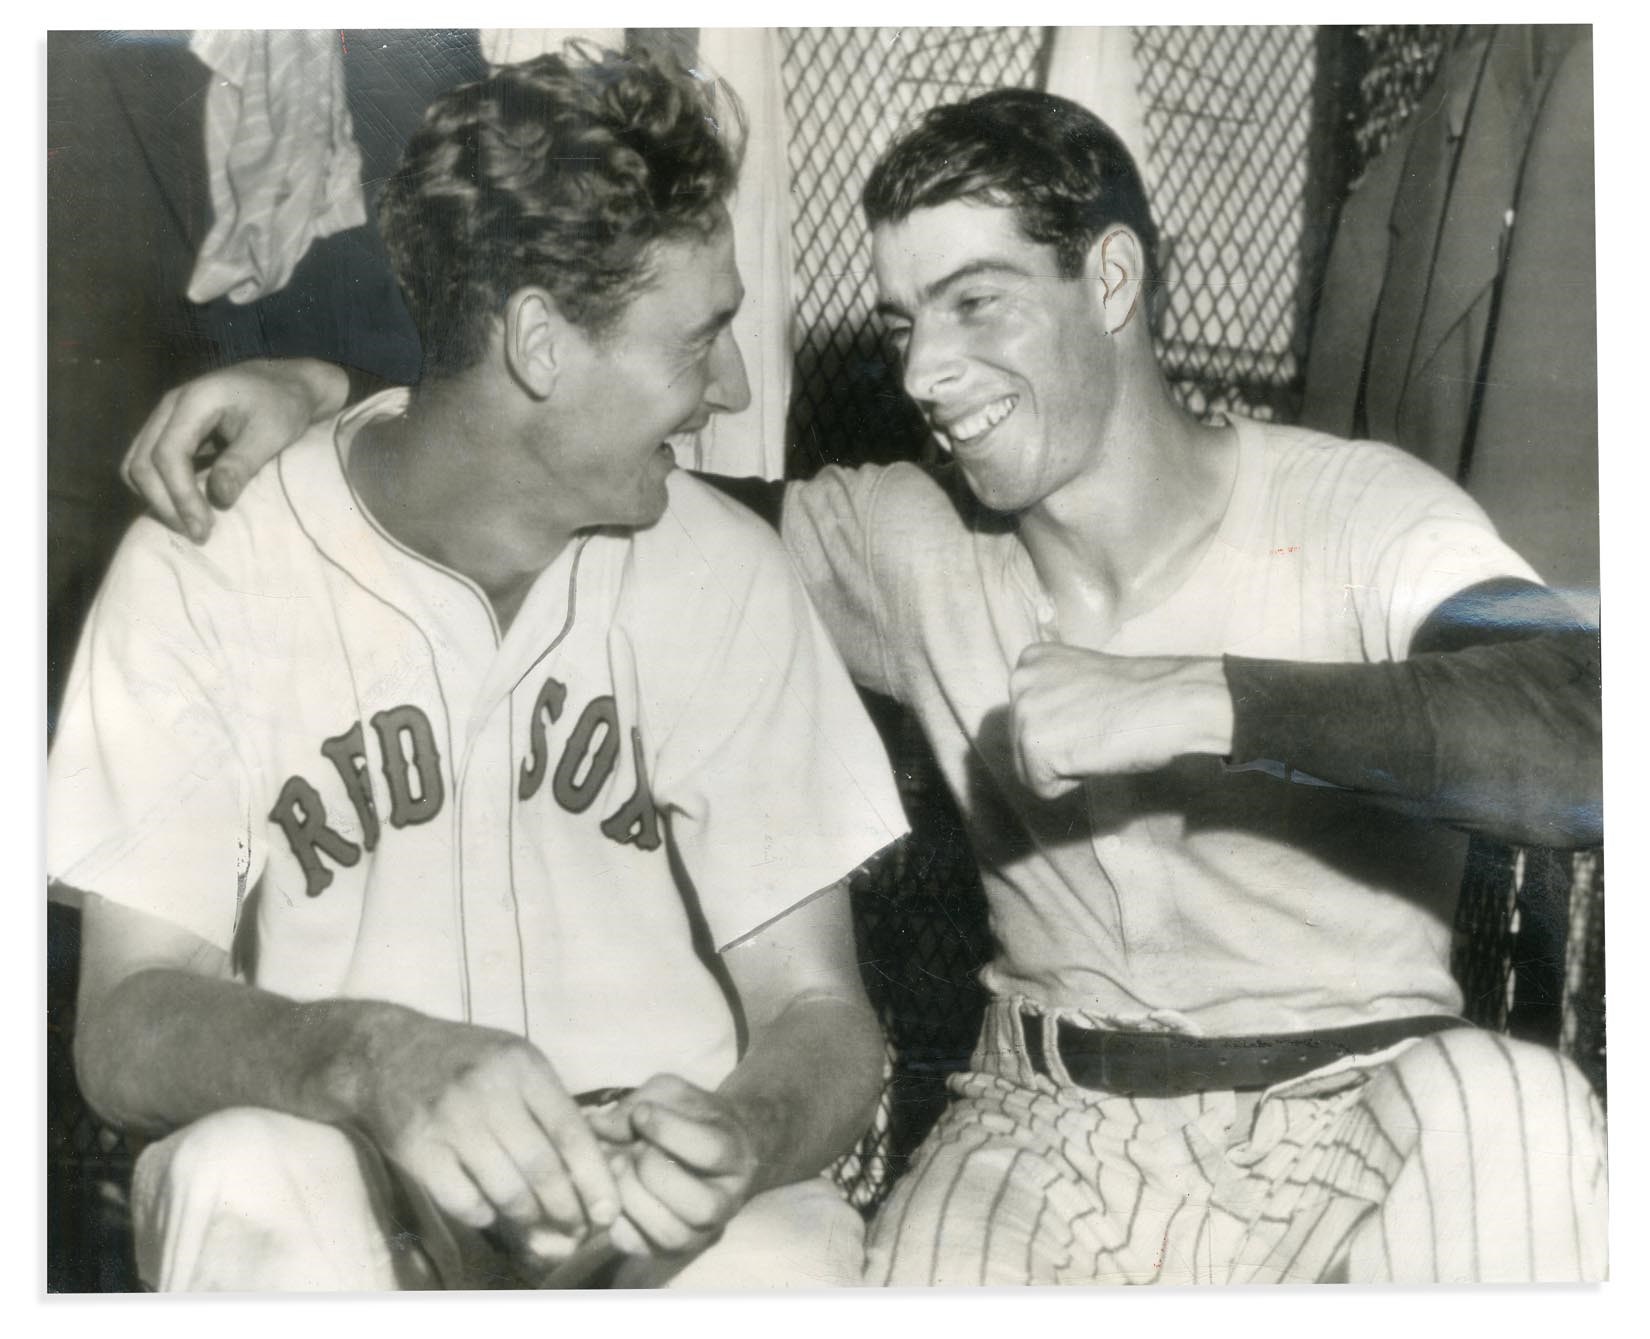 Vintage Sports Photographs - 1941 Joe DiMaggio & Ted Williams Photo from Their Greatest Seasons